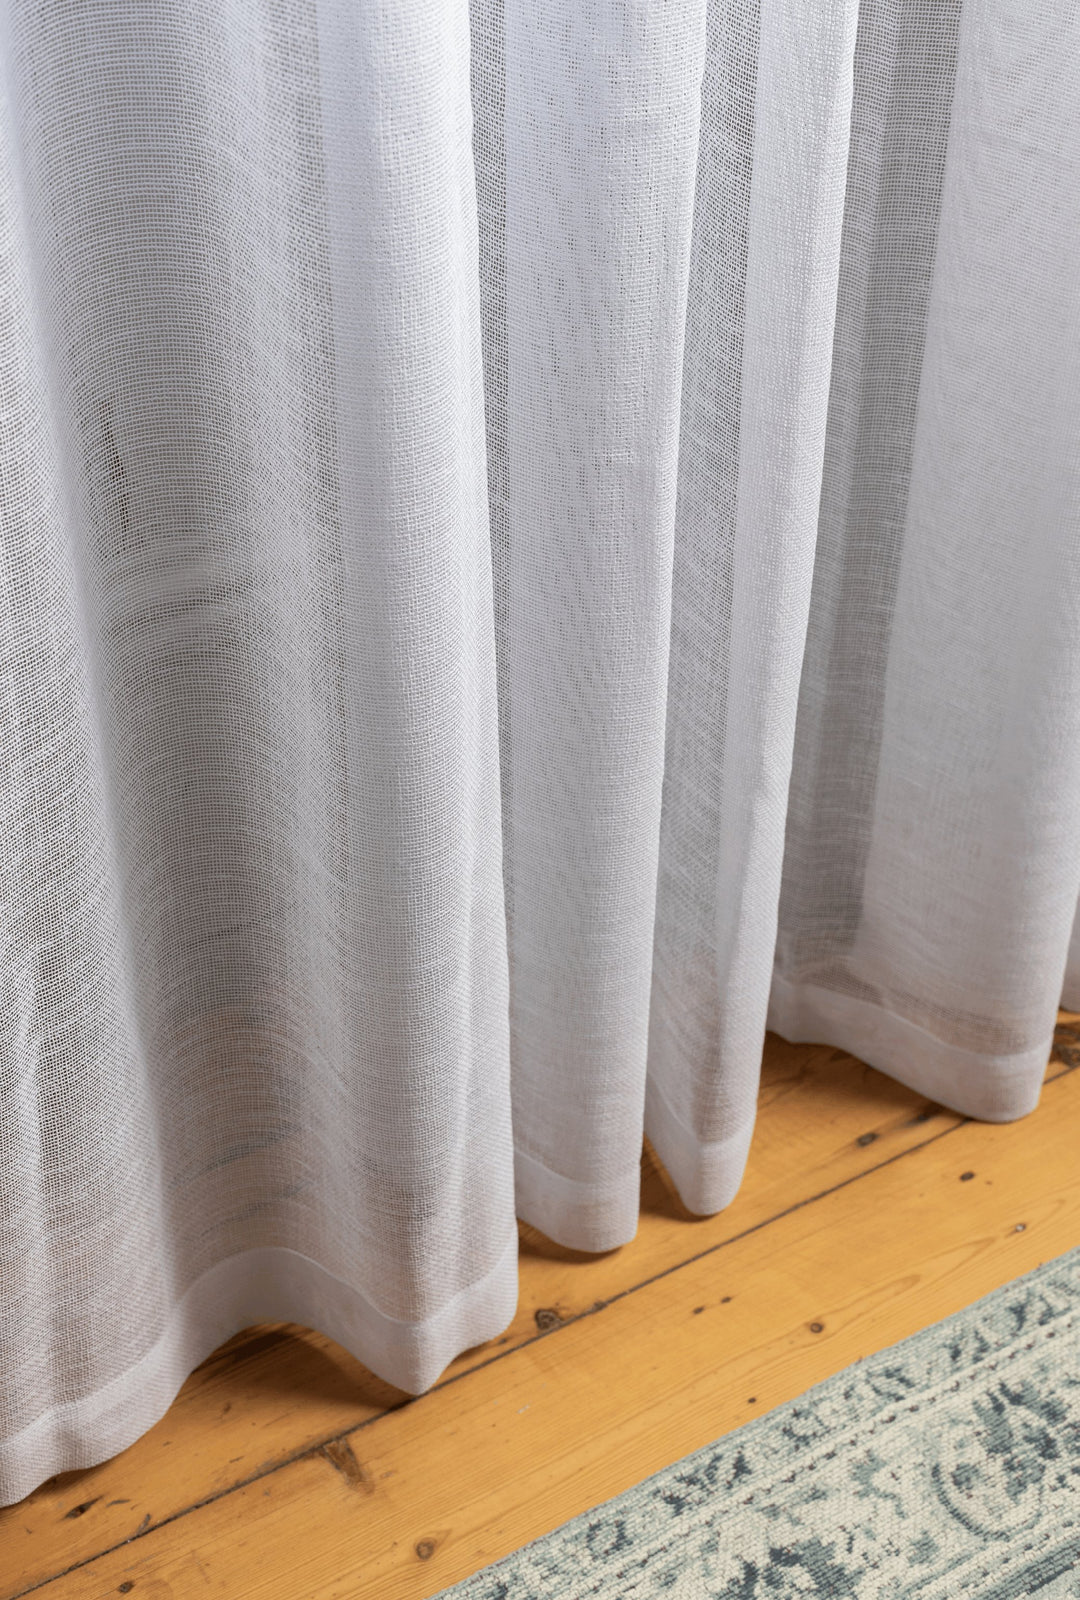 Author Ready Made Unlined Extra Length Curtain in White - Curtains & Drapes- Hertex Haus Online - Curtains